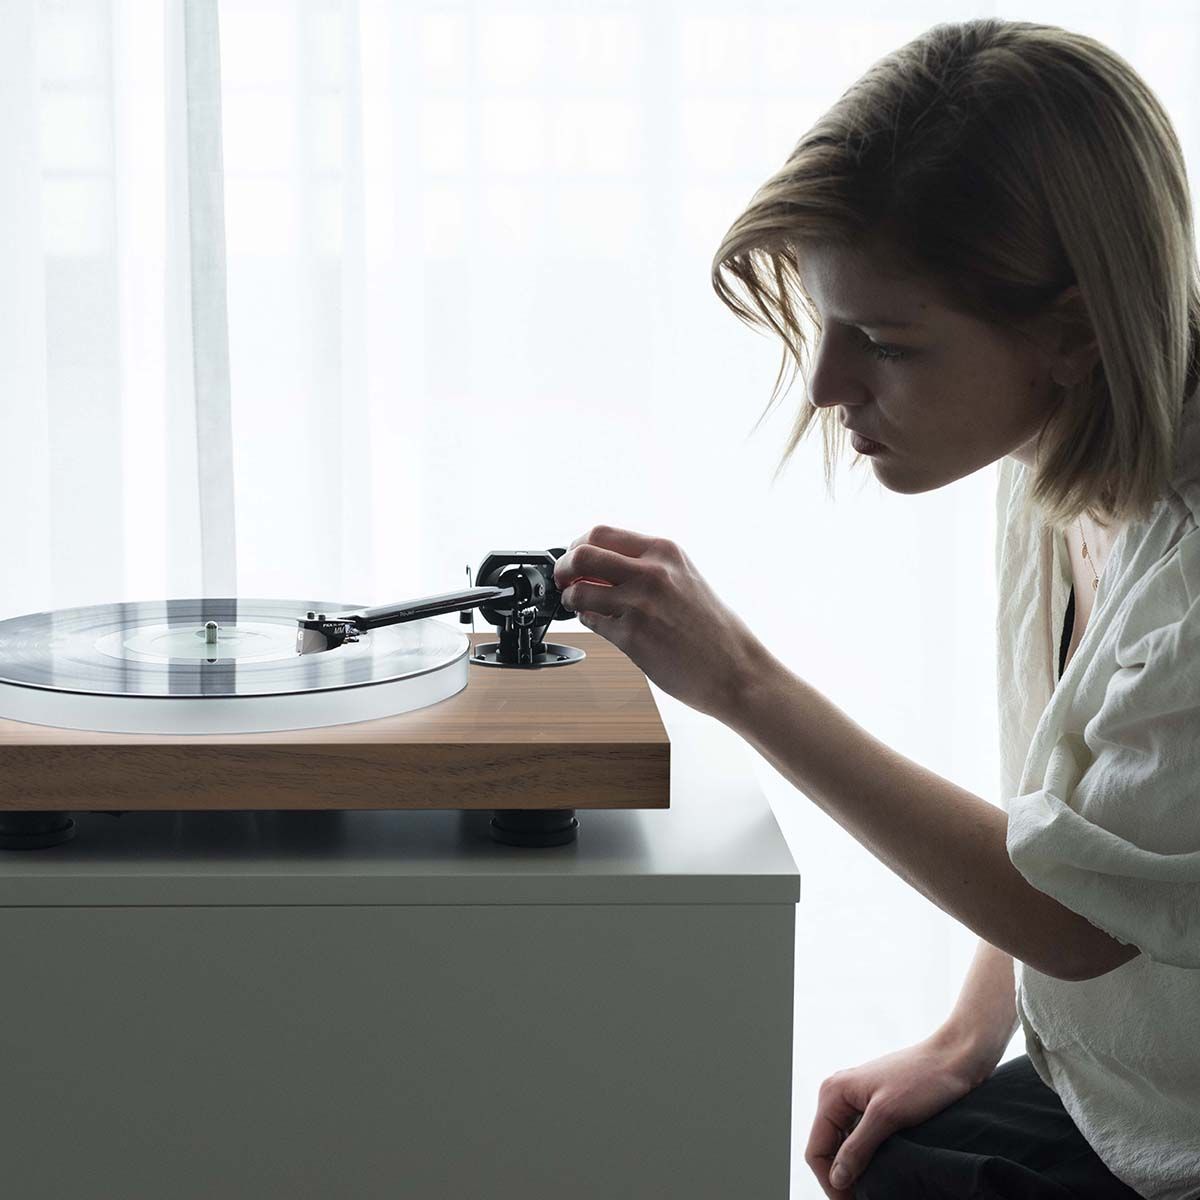 Pro-Ject X1B True Balanced Turntable - on table with female lowering tonearm